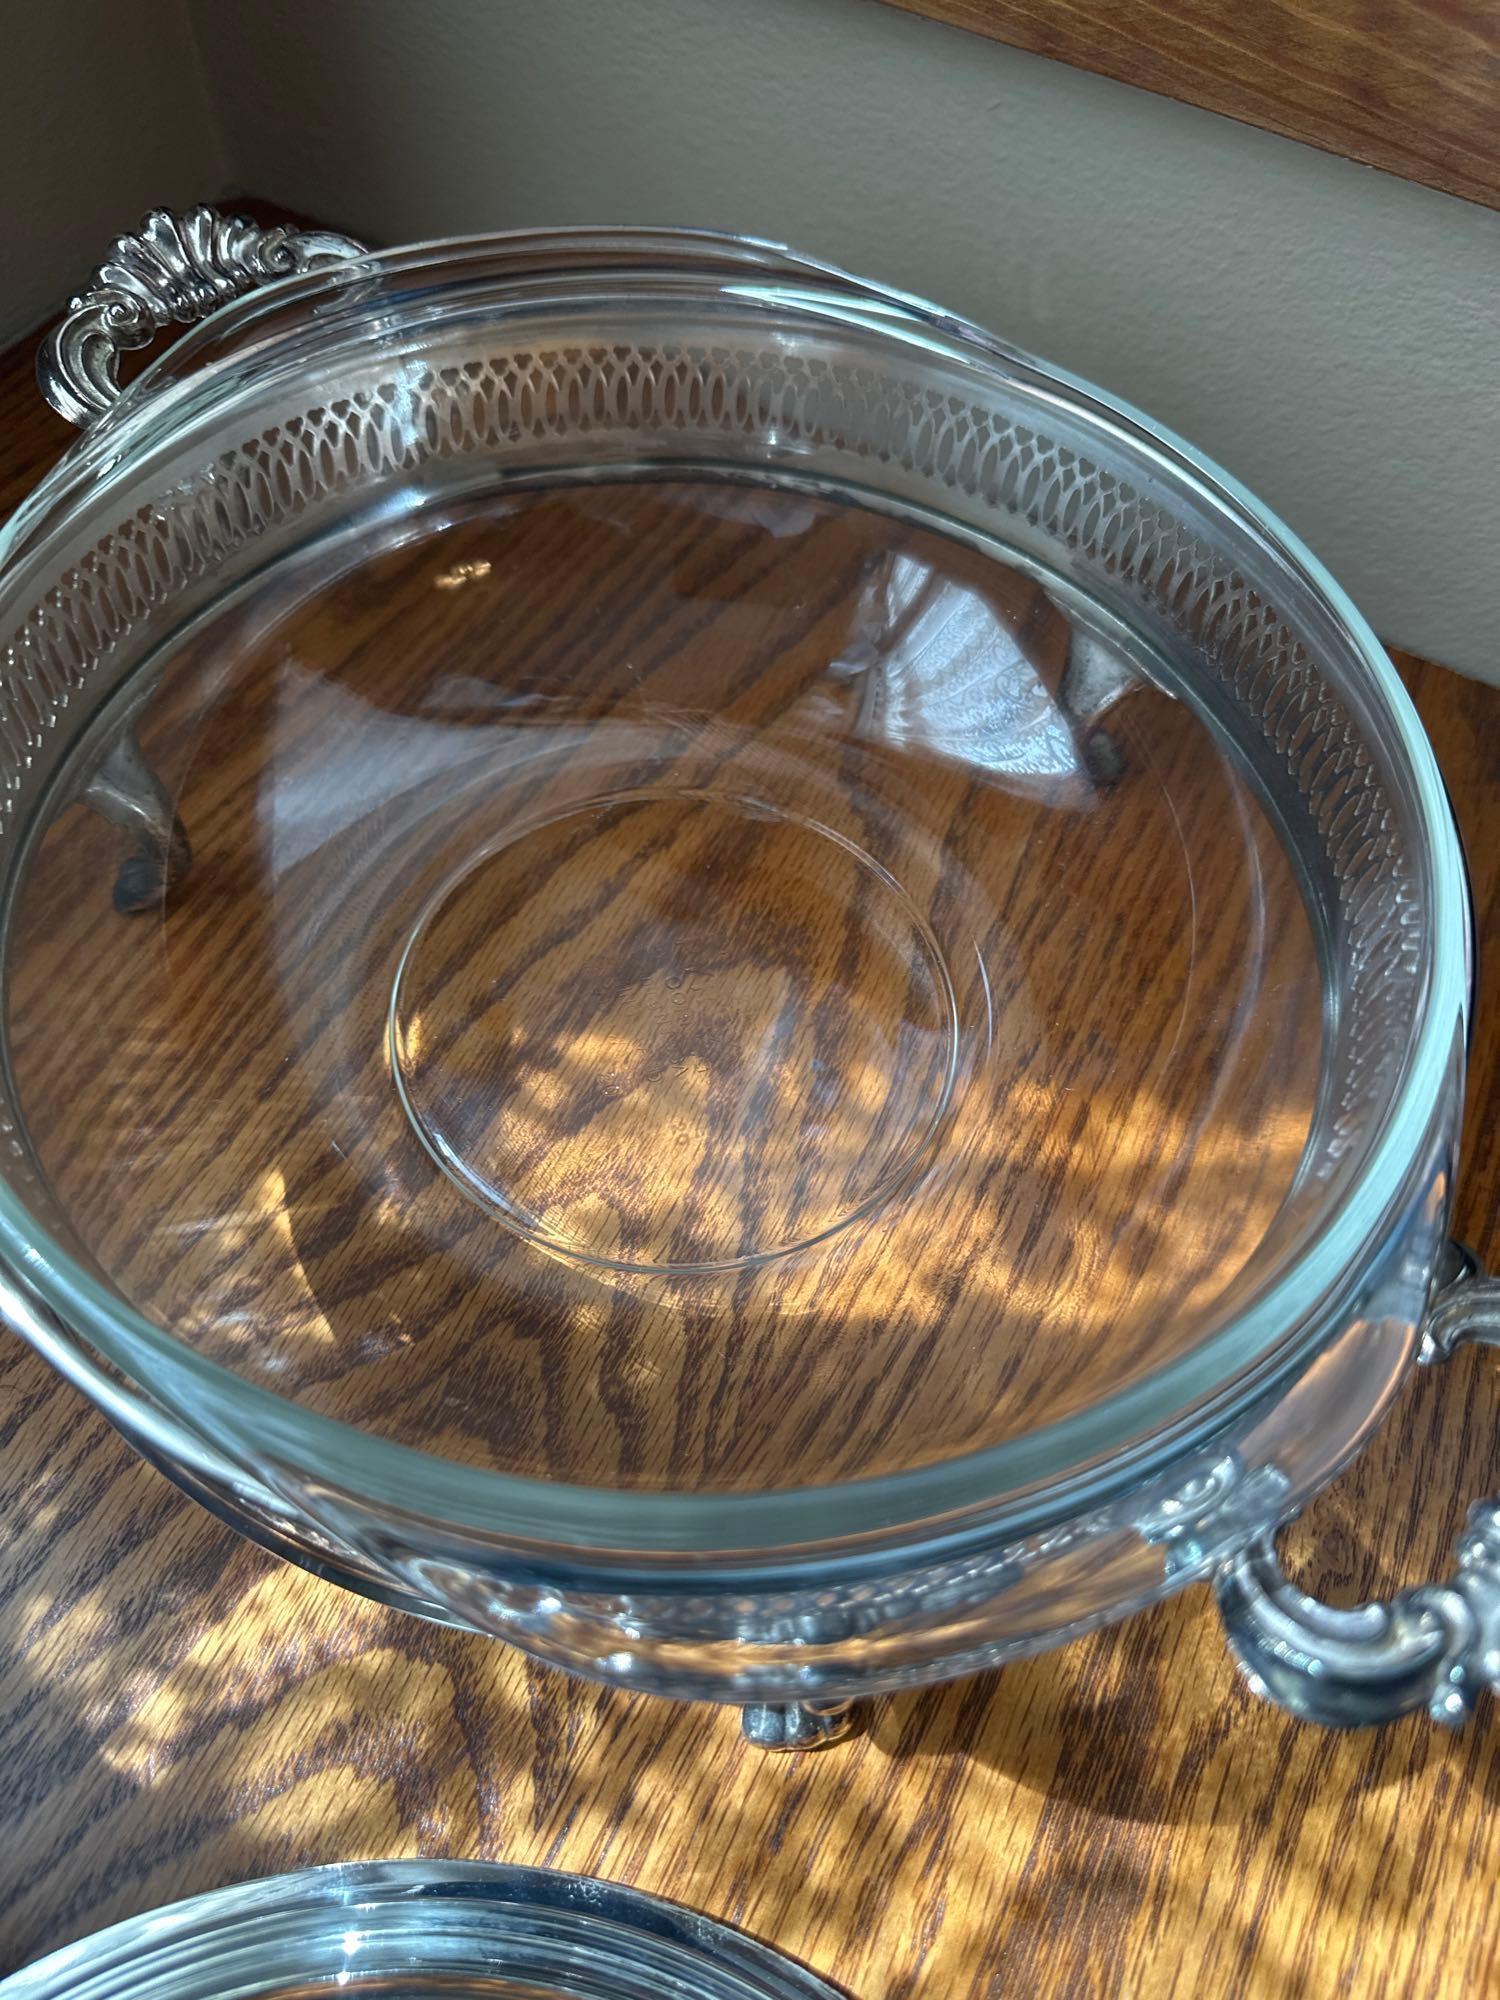 Pyrex casserole bowl with lid and ornate carrier, aluminum bread carrier, aluminum carrier for glass